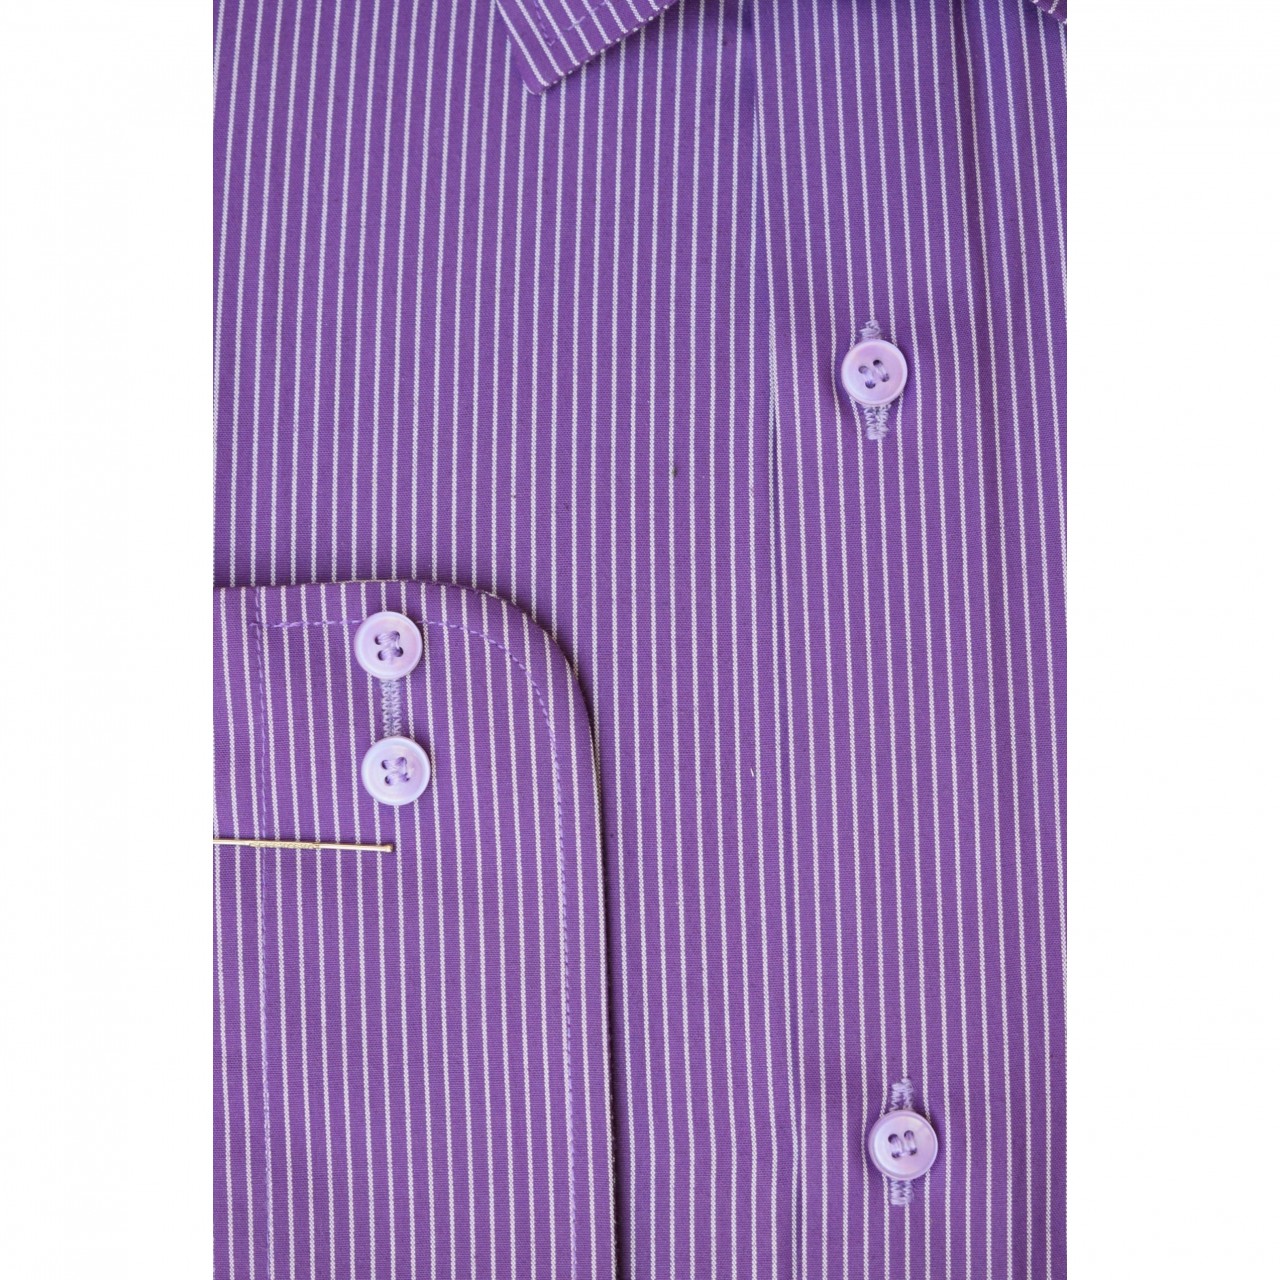 Formal Shirt With Double Needle Stitching For Men - Purple